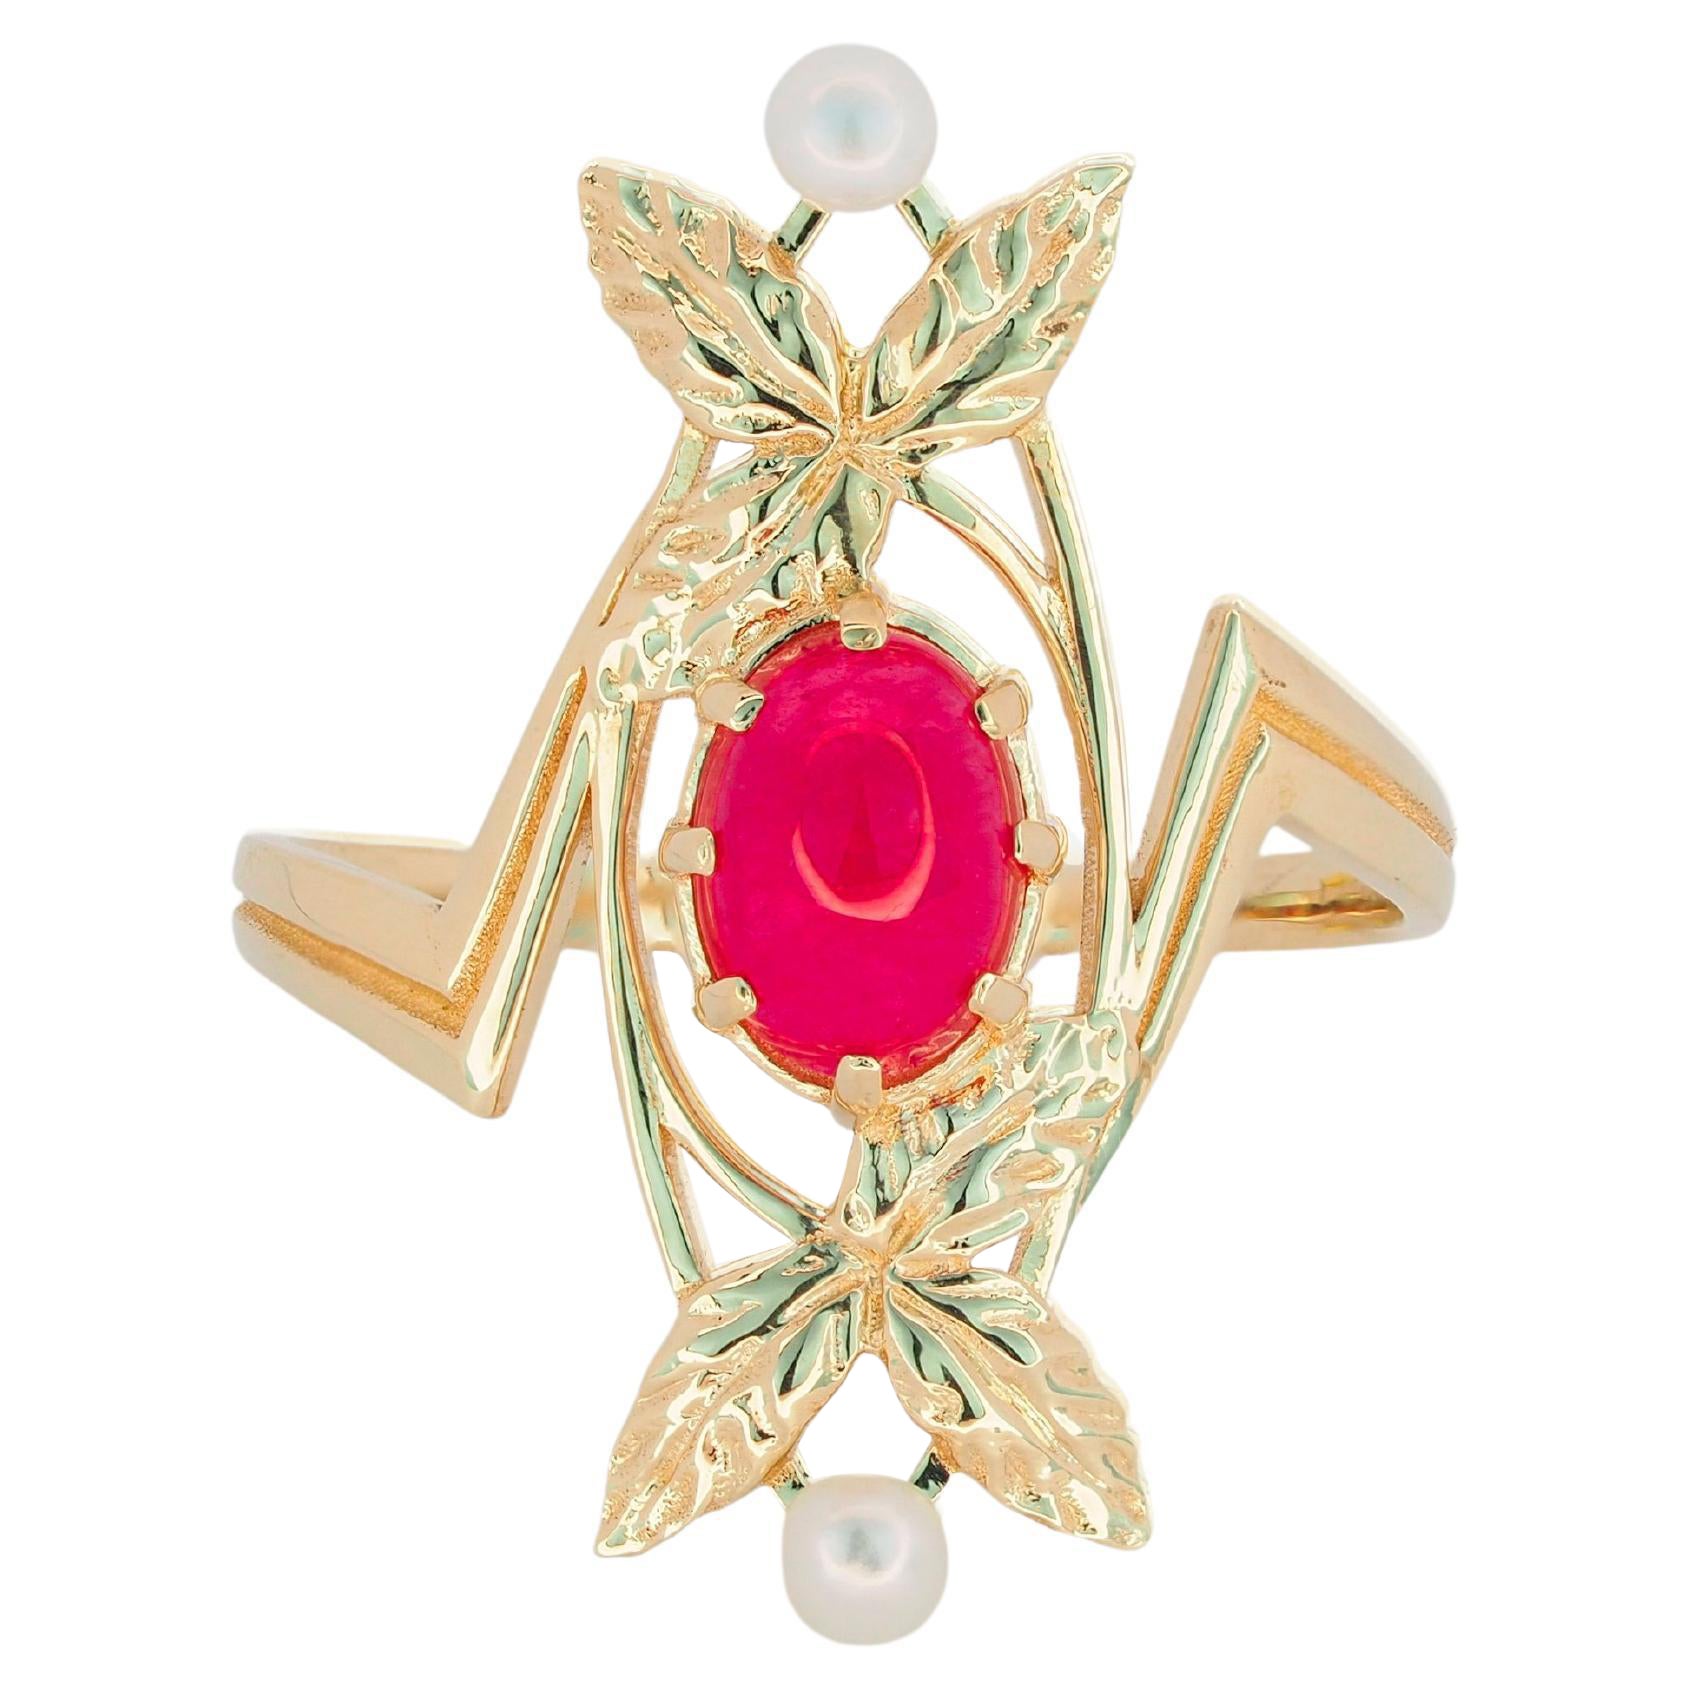 14 Karat Gold Ring with Ruby and Pearls, July Birthstone Ring